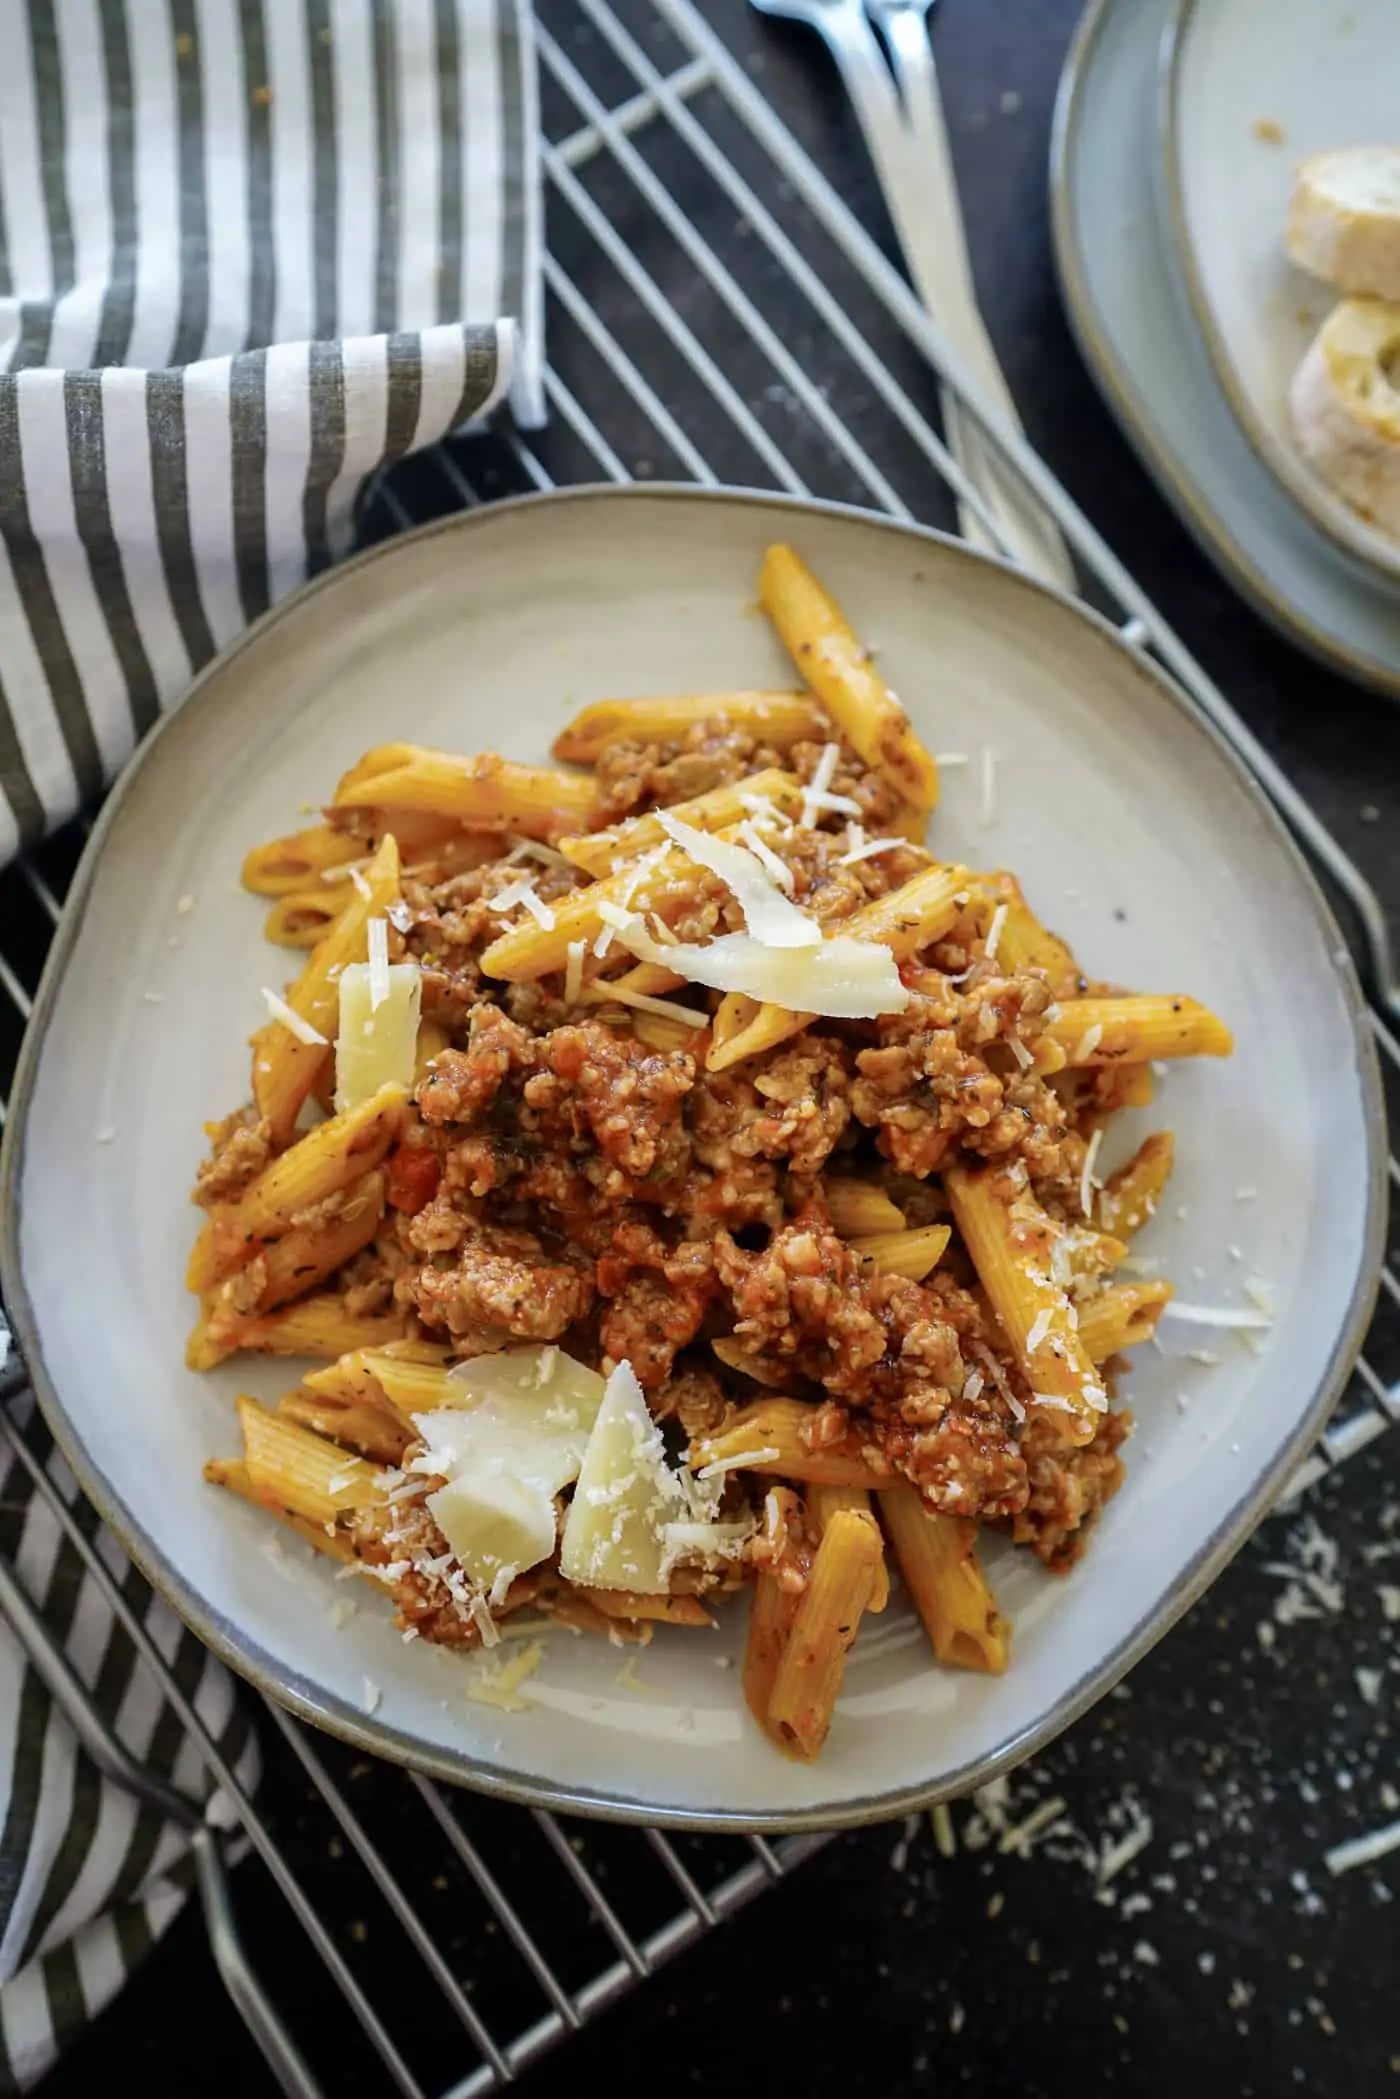 A plate of Instant Pot Penne Pasta made with suasage and parmesan cheese